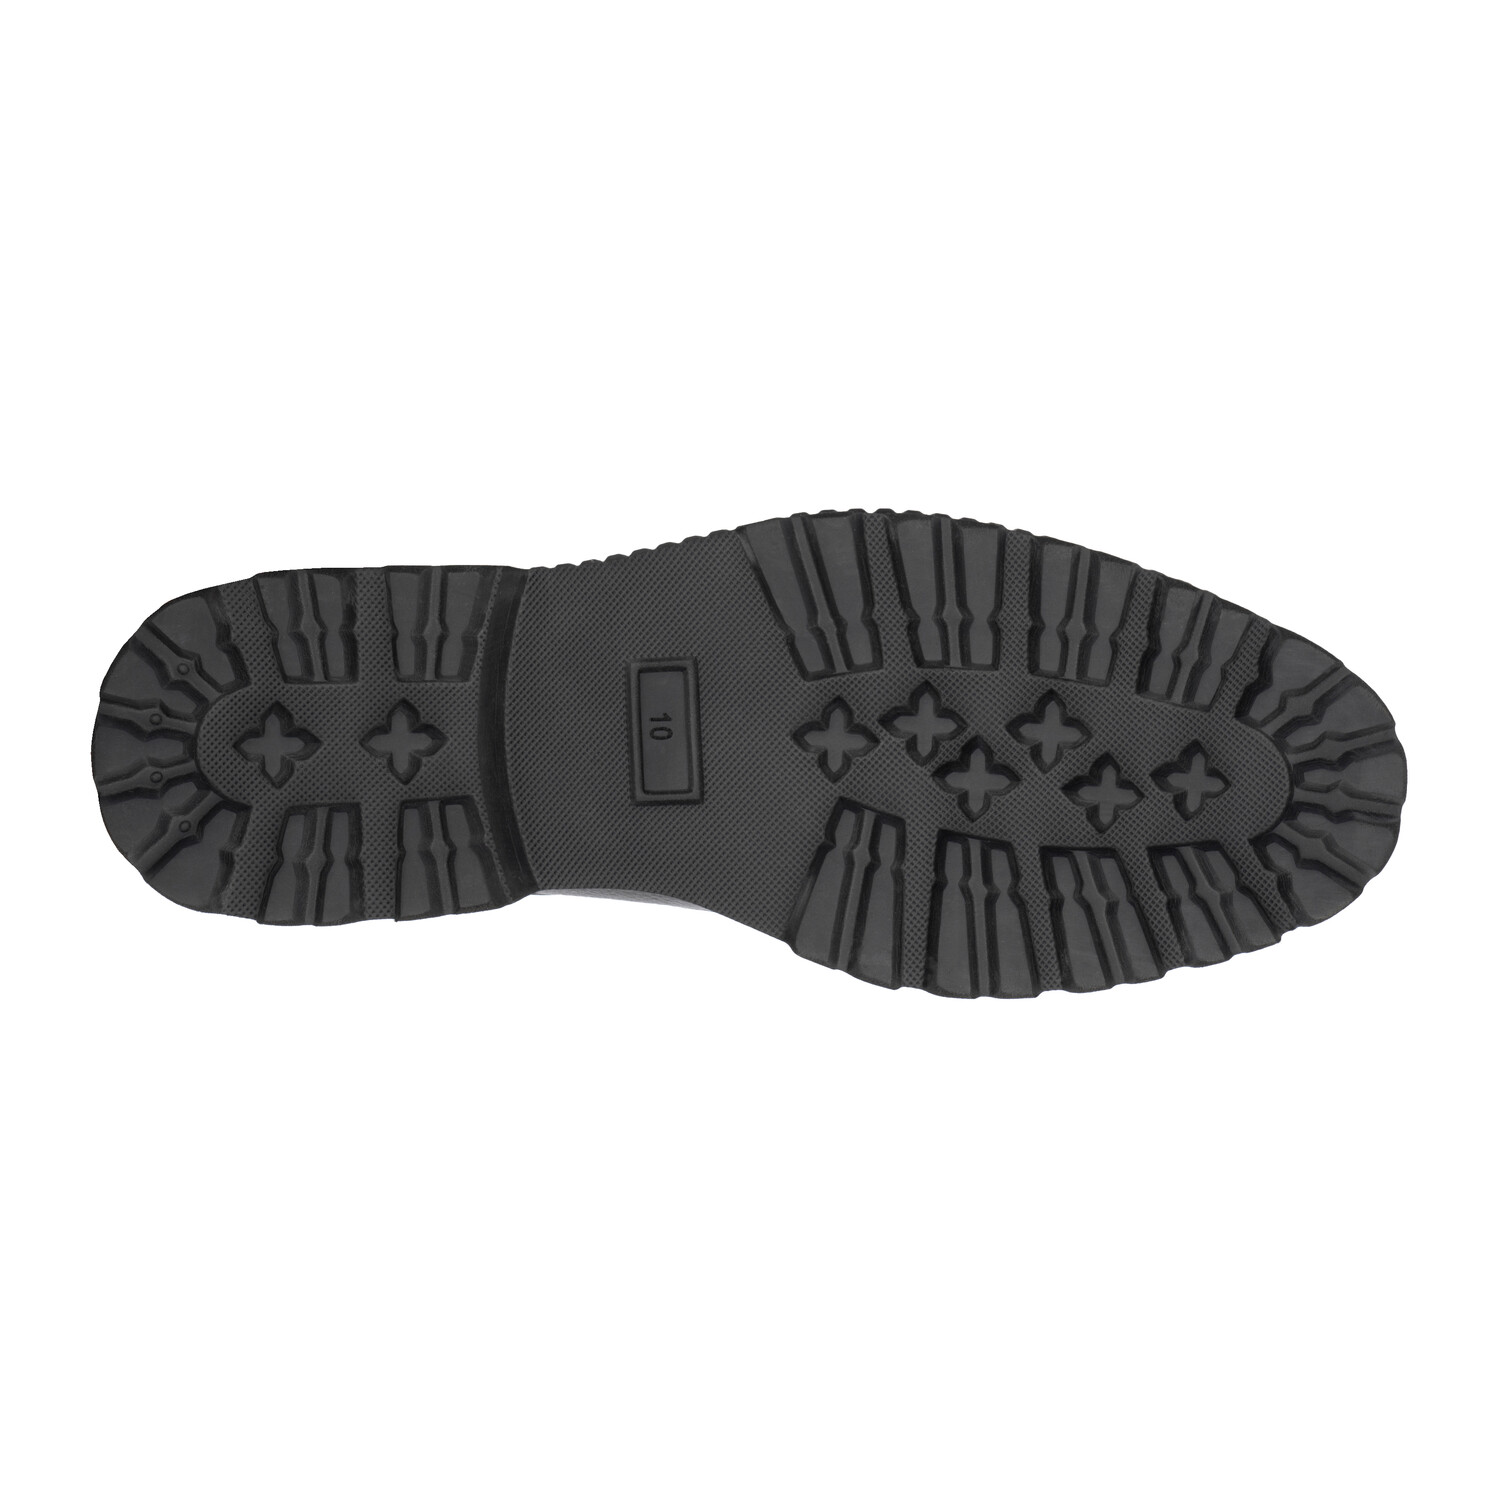 Logan Shoe // Black (US: 8) - S3 Holding - Touch of Modern